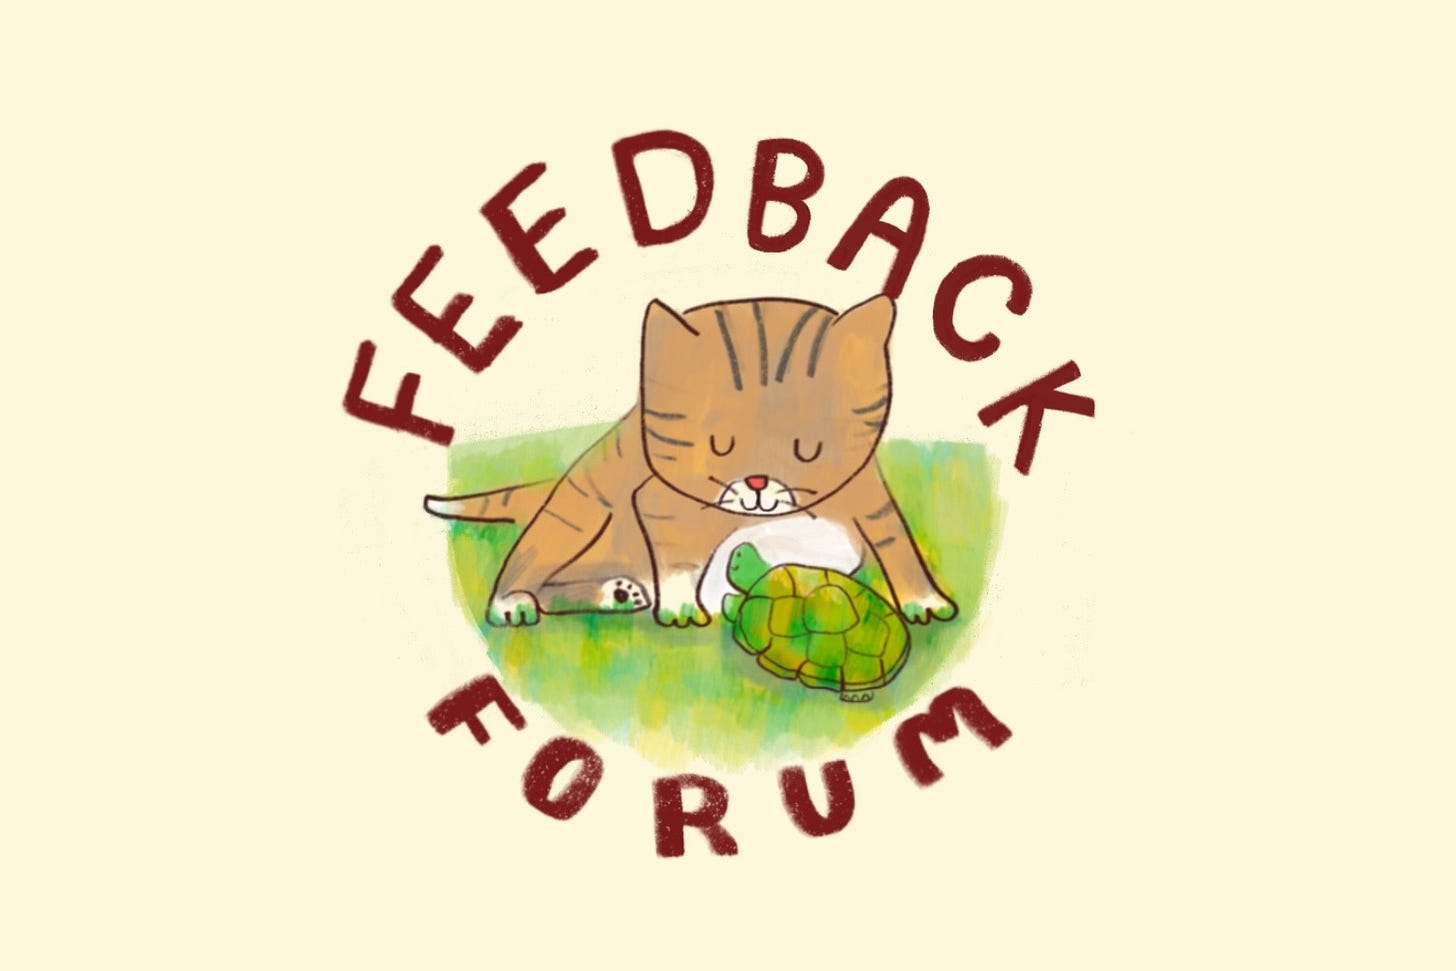 Feedback Forum logo illustration of kitten and turtle by Beth Spencer